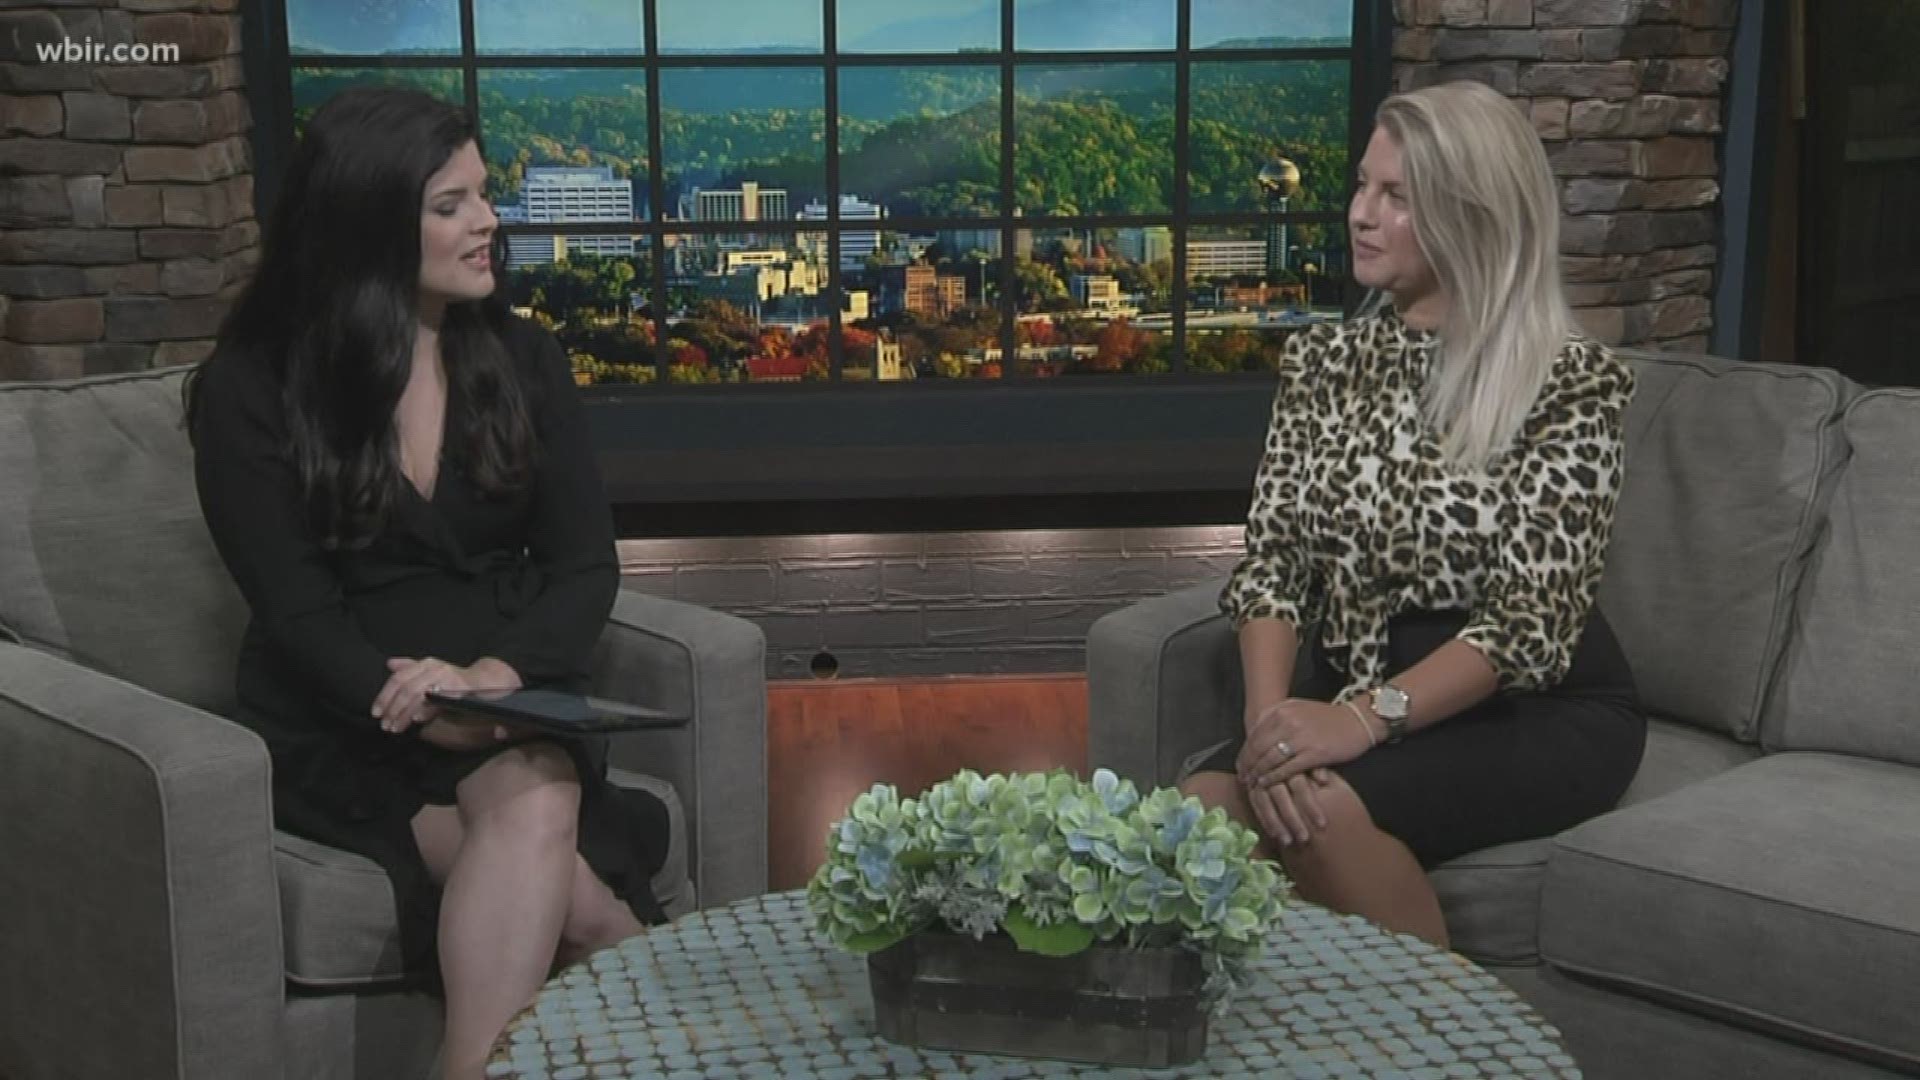 Kristine Davenport, a certified financial planner at The Trust Company of Tennessee, talks about a program that helps women piece together their financial lives when life events like divorce or the death of a spouse happen.